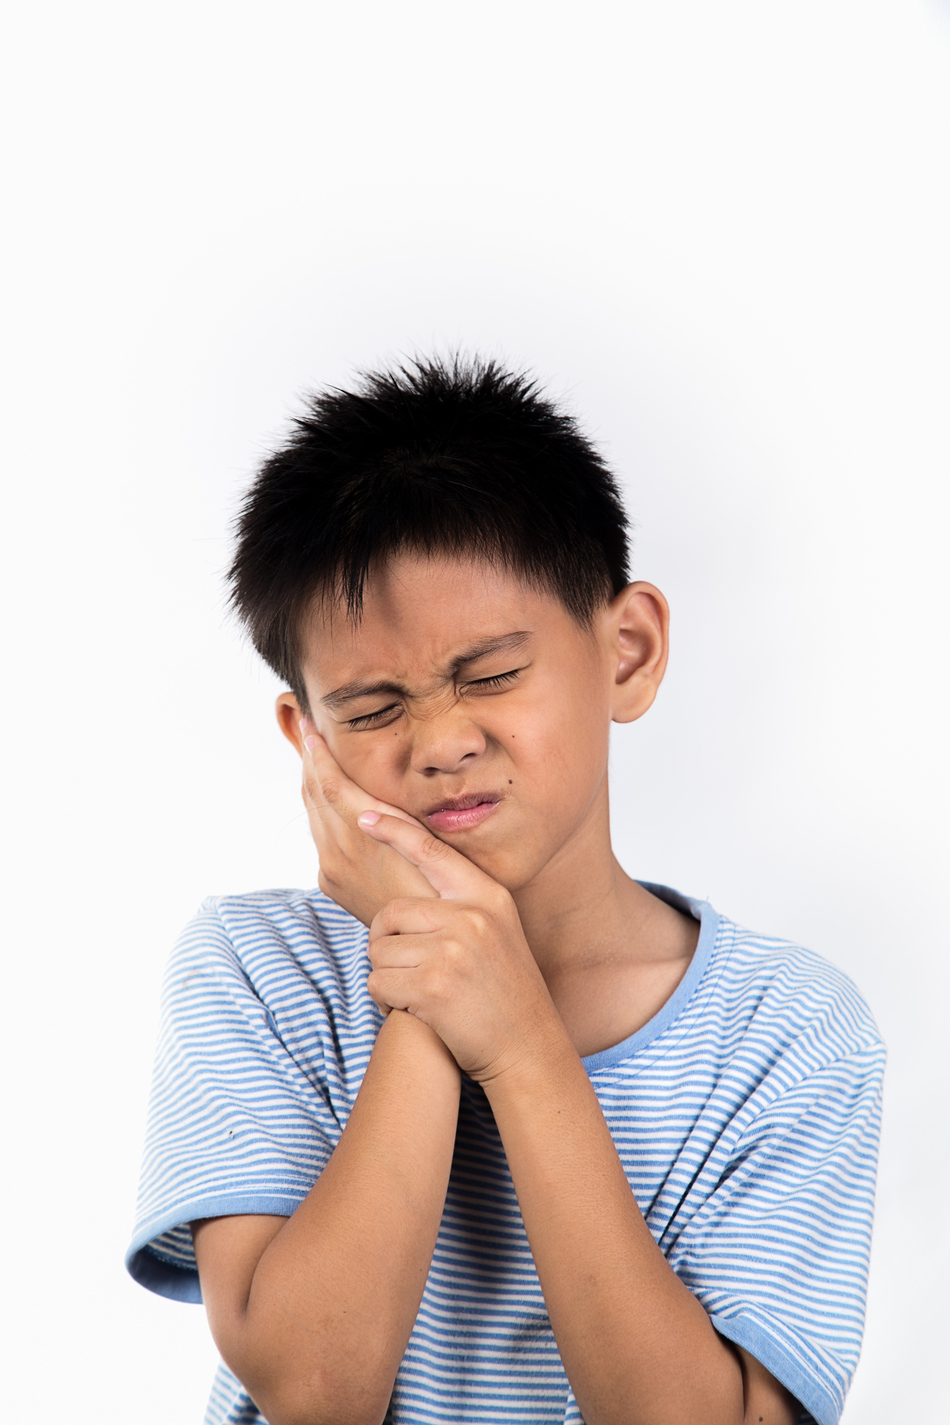 What to Do When Your Child Chips or Knocks Out a Tooth